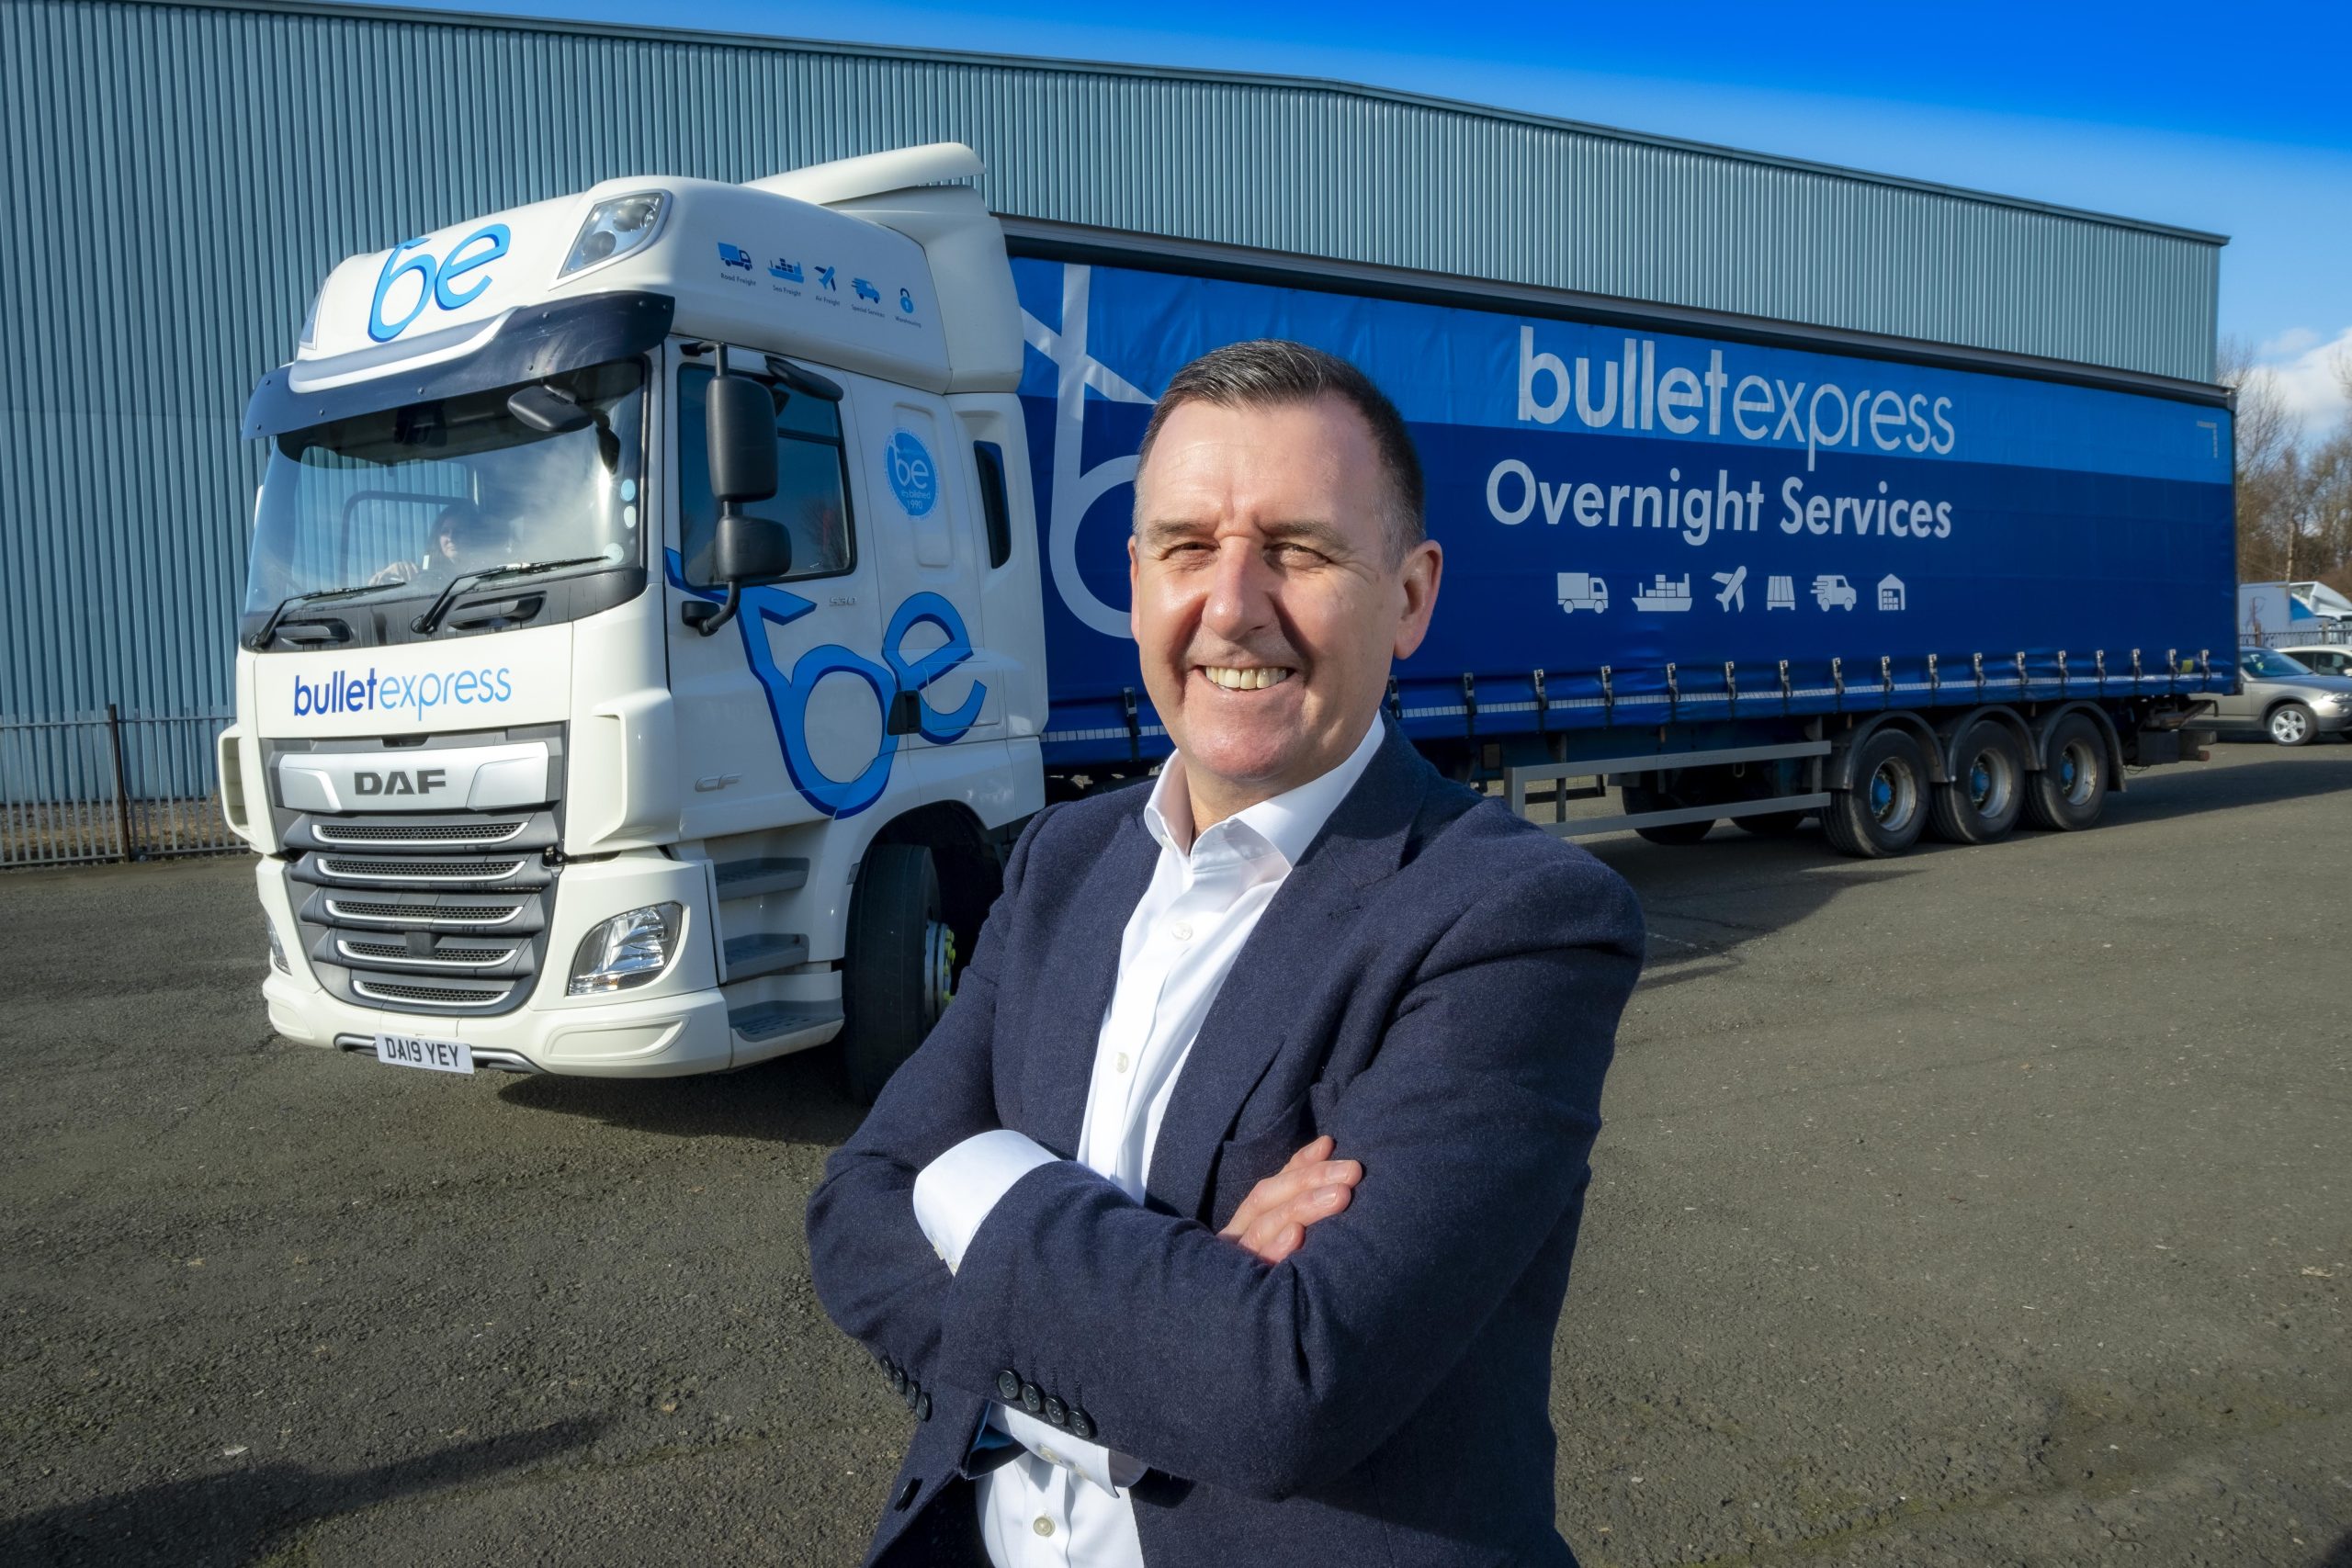 Scotland’s Finest To Global Supply Chain Connector